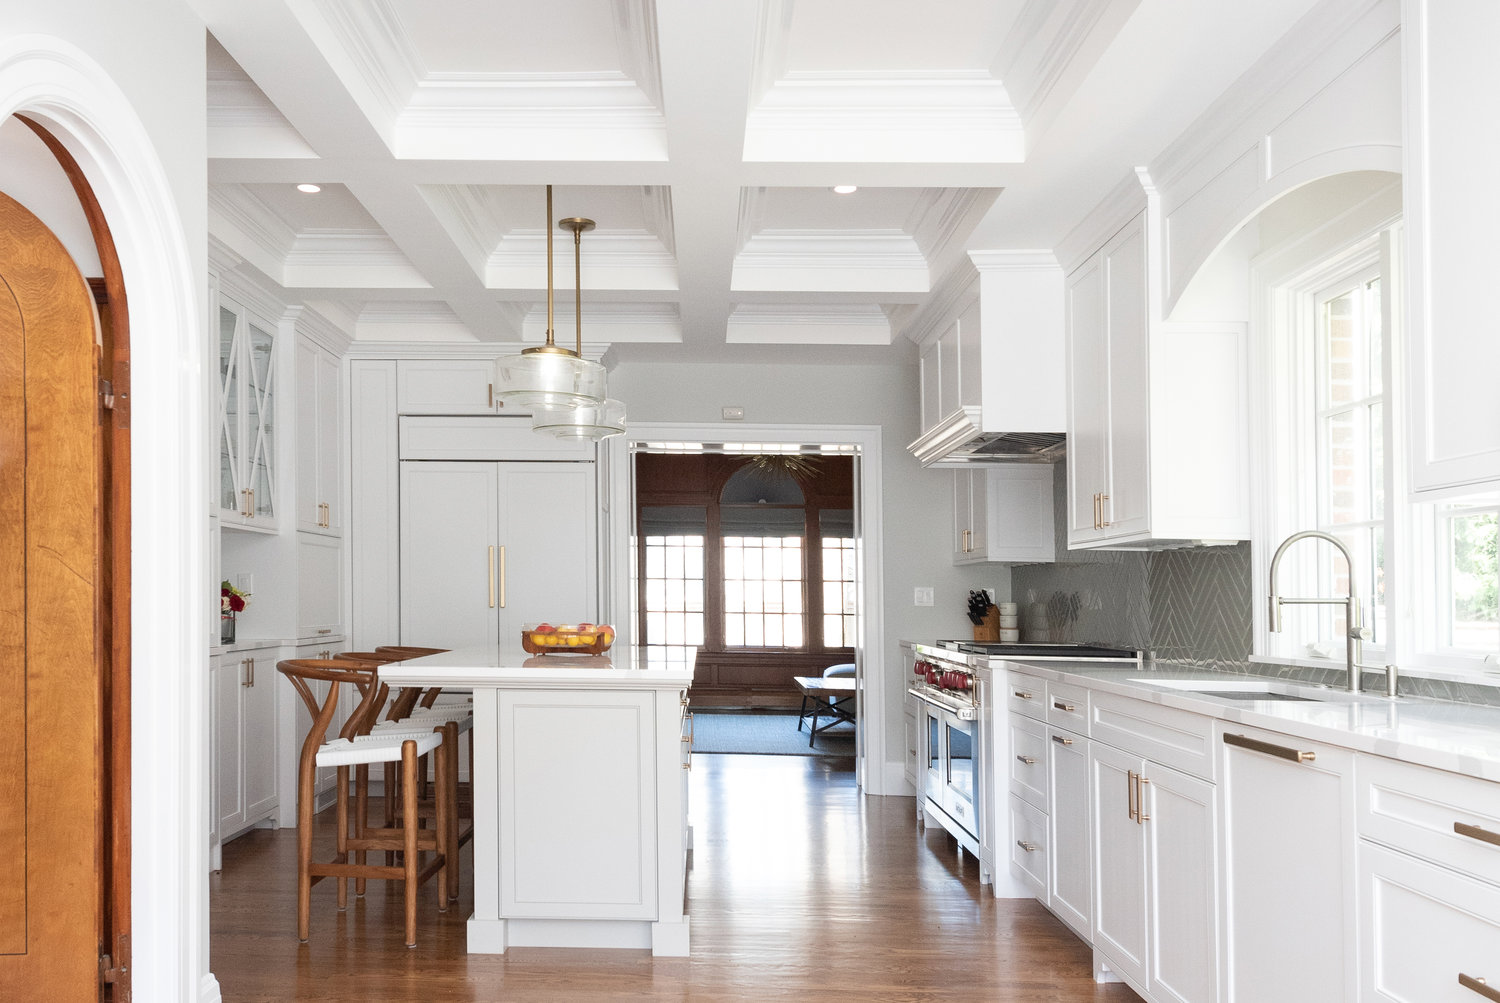 Coffered ceilings draw the eye up and contribute visual space